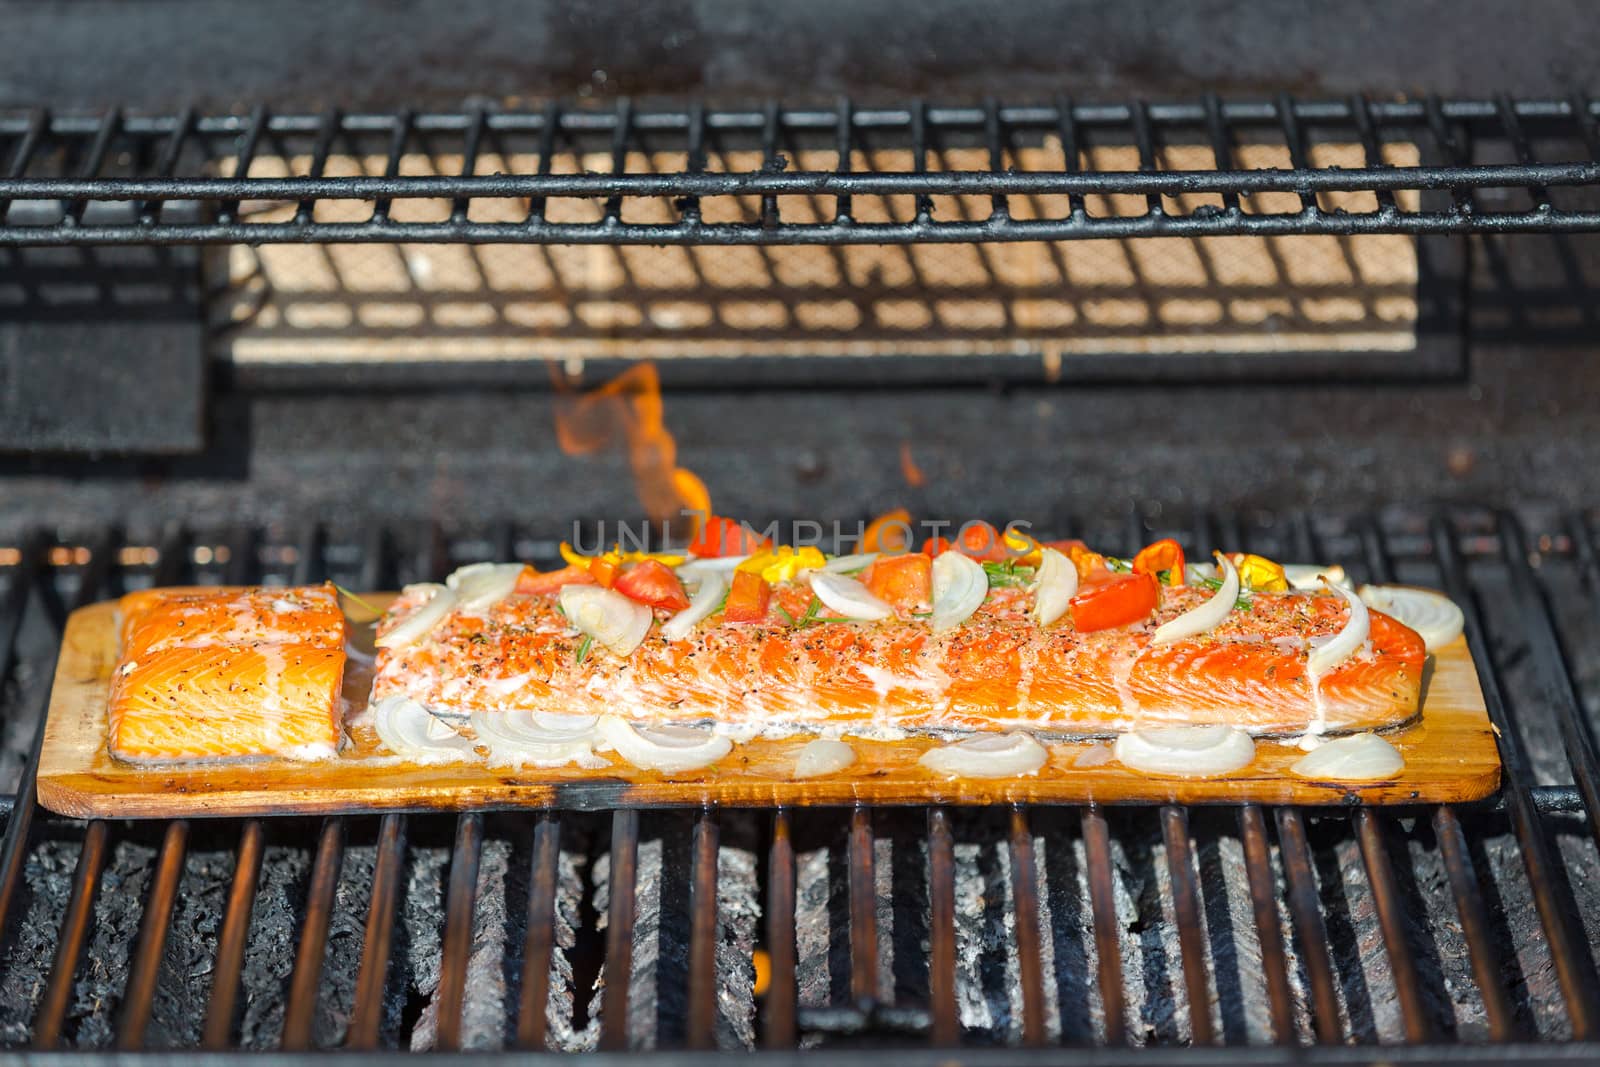 Cooking salmon on cedar plank in the barbecue, garnished with onions, tomatoes, dill and herbal seasonings